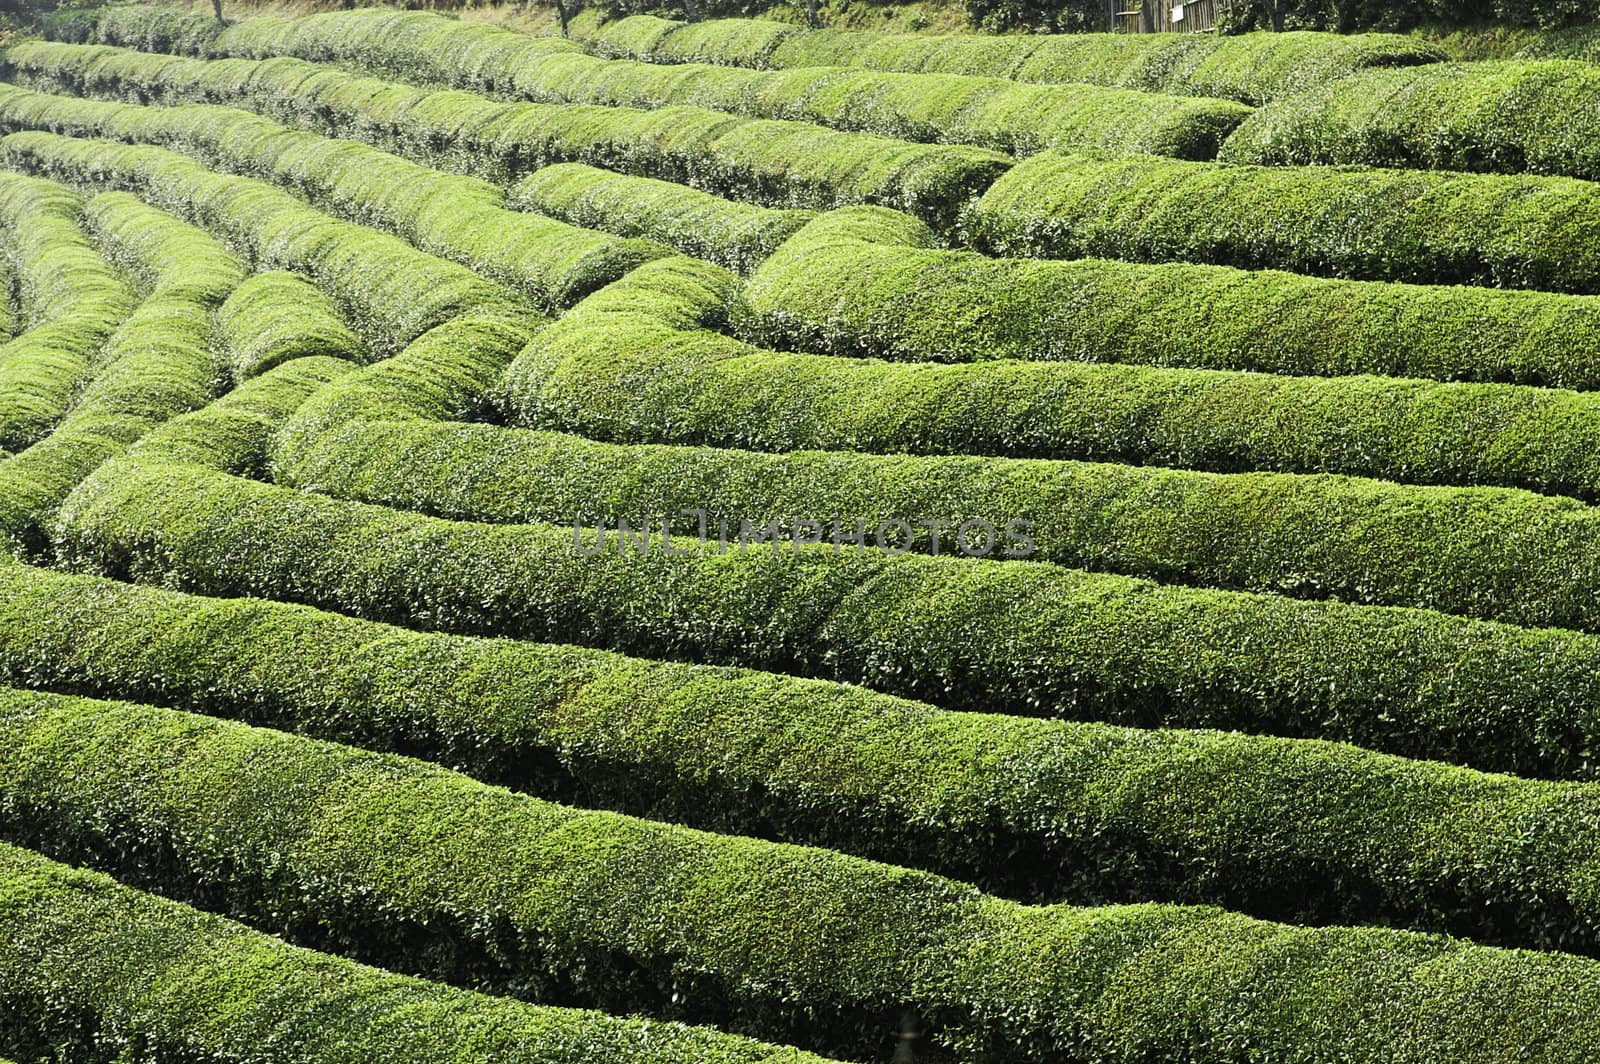 A green tea field sectioned into terraces on a farm in asia.